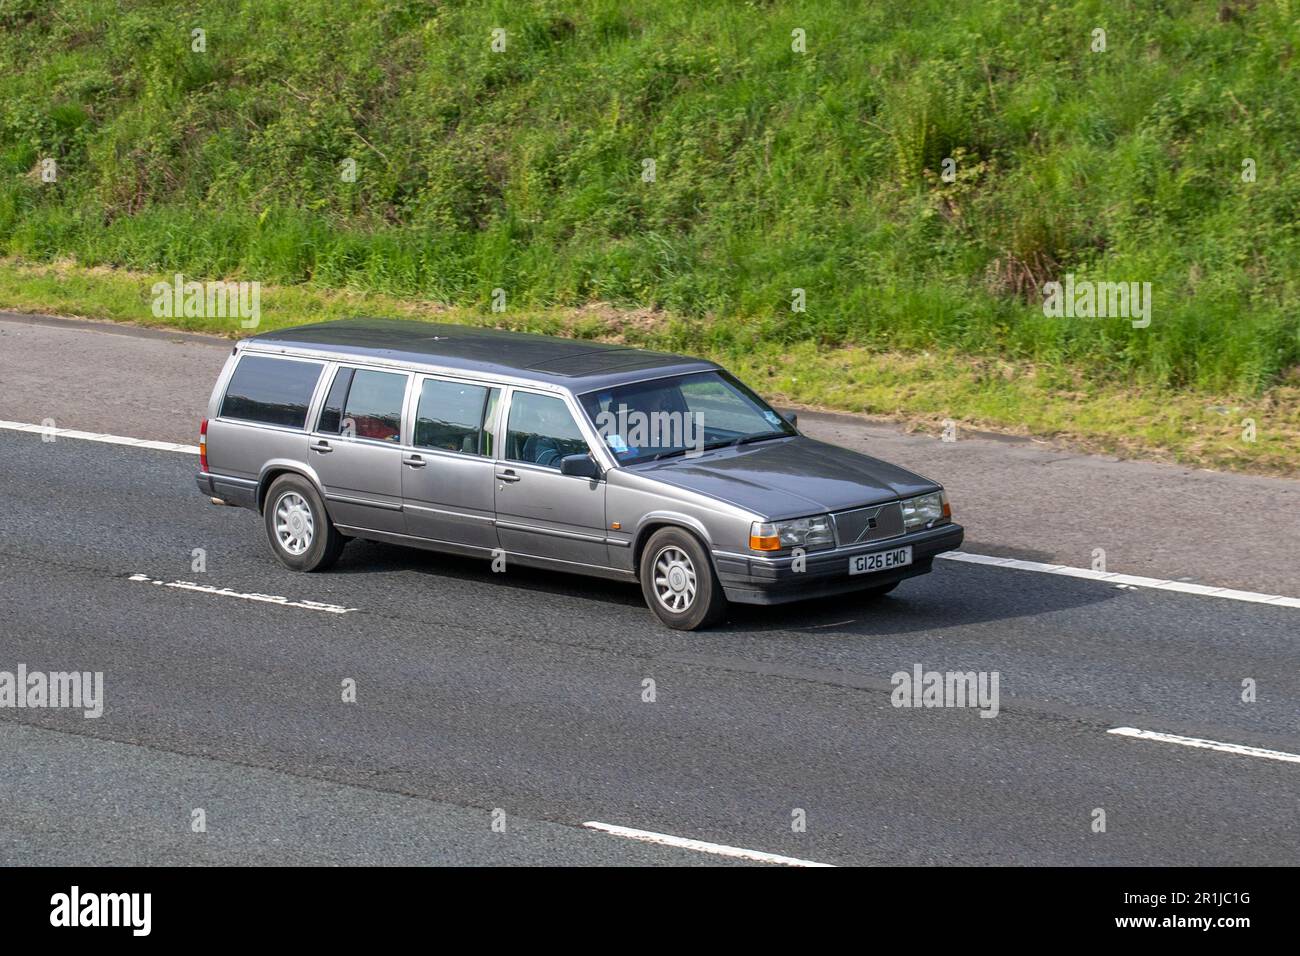 1990 90s nineties stretched Volvo 760 Gle Auto Auto Grey Car Estate Petrol 2849 cc 6-door estate; travelling on the M61 motorway, UK Stock Photo